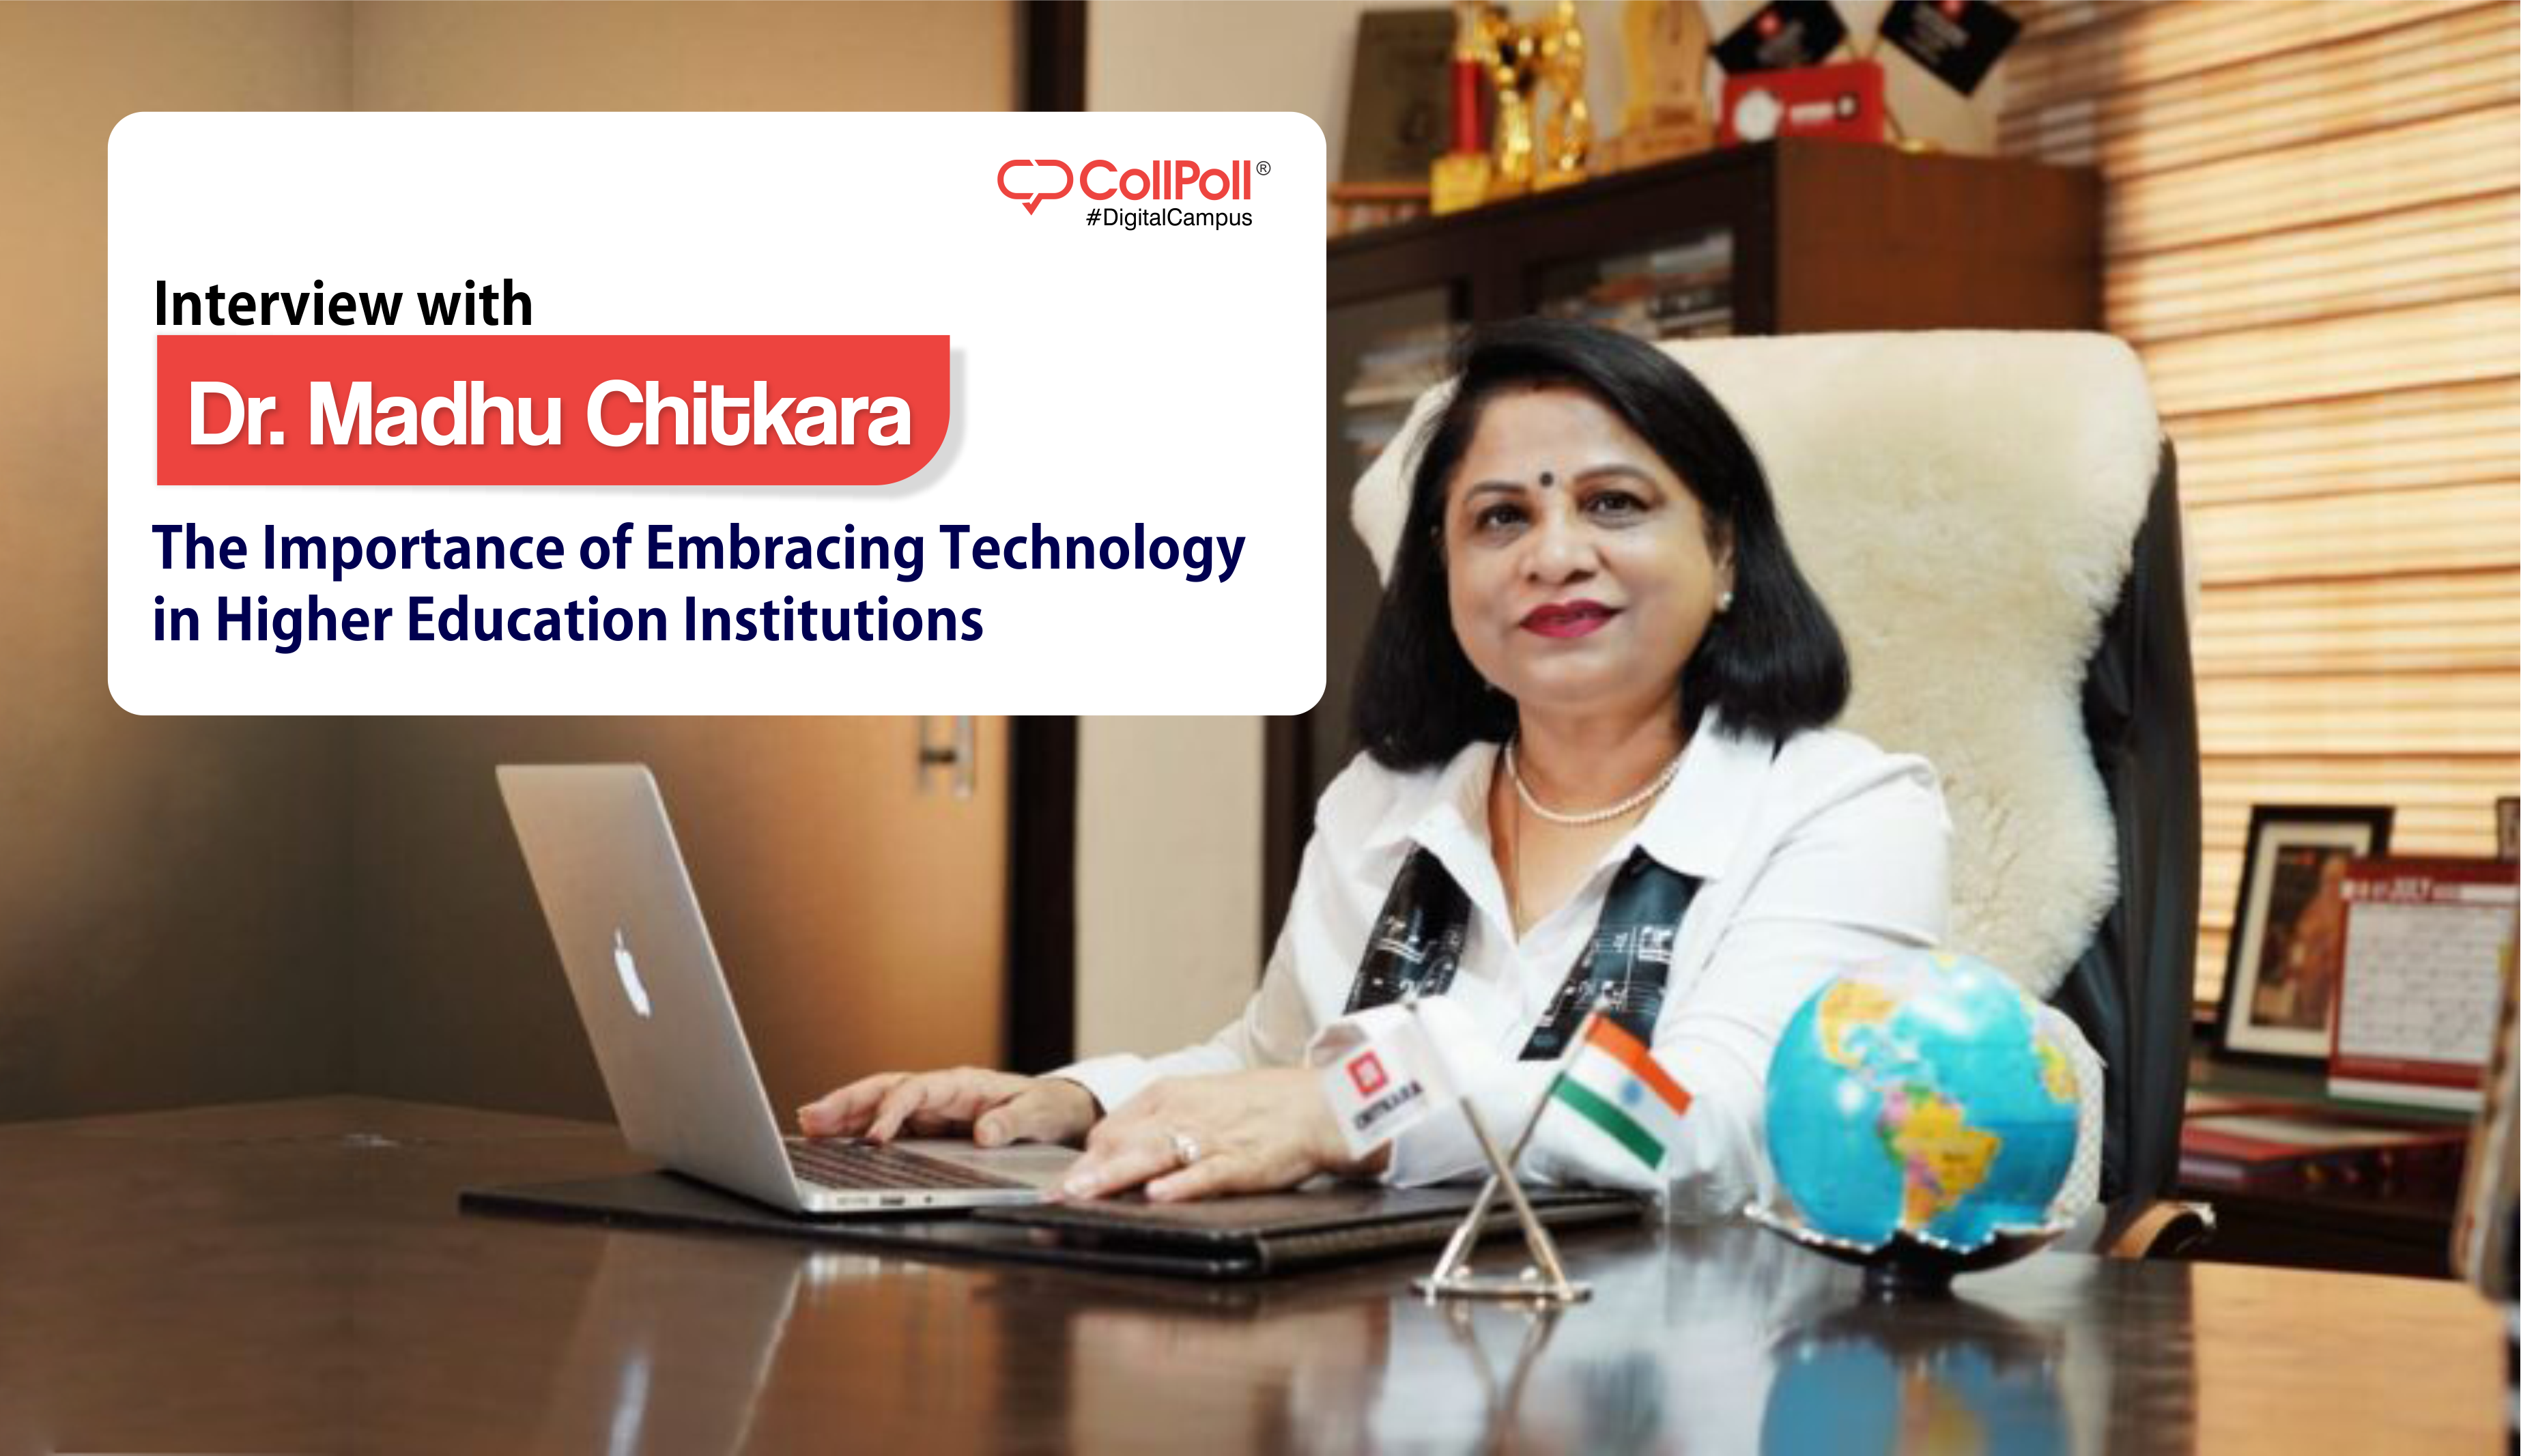 Interview with Dr. Madhu Chitkara: The Importance of Embracing Technology in Higher Education Institutions